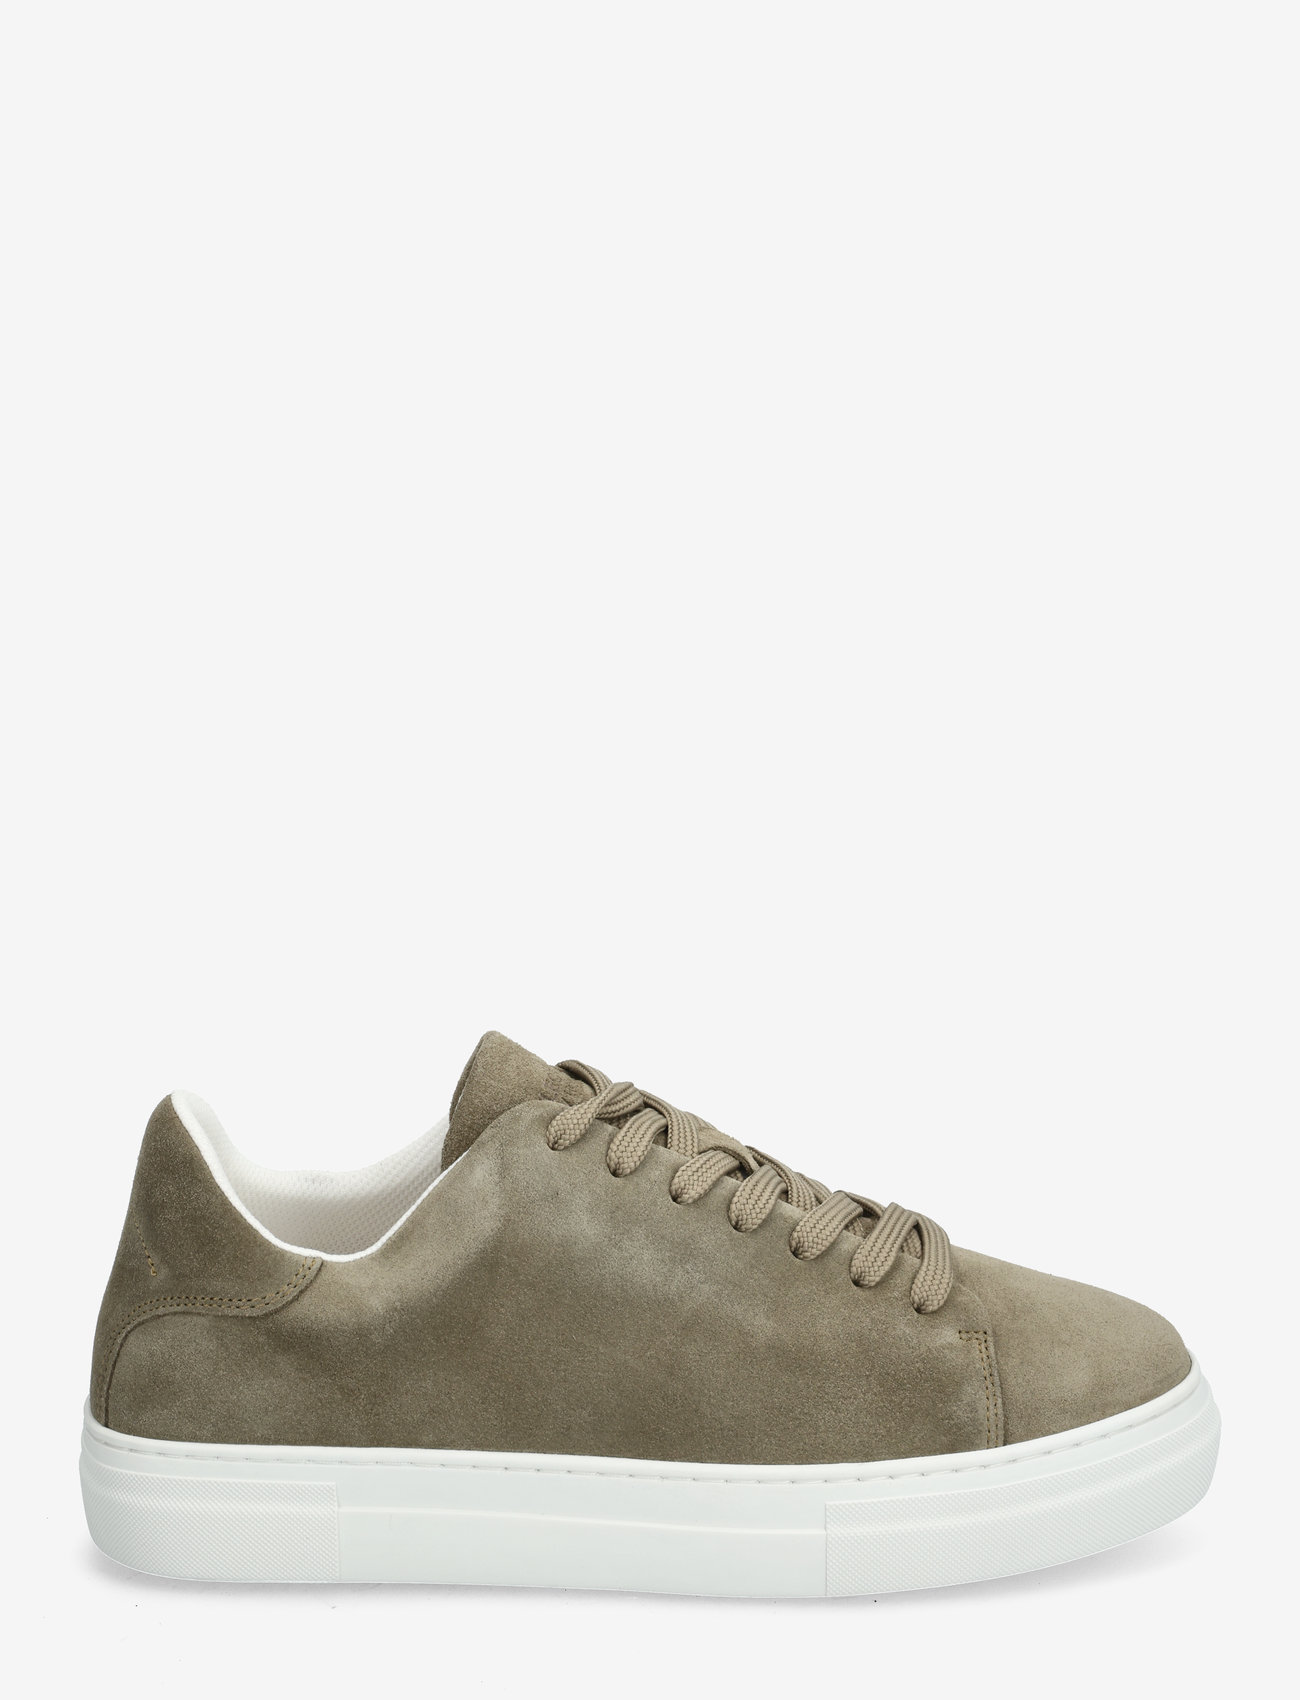 Selected Homme - SLHDAVID CHUNKY CLEAN SUEDE TRAINER B - low tops - grape leaf - 1